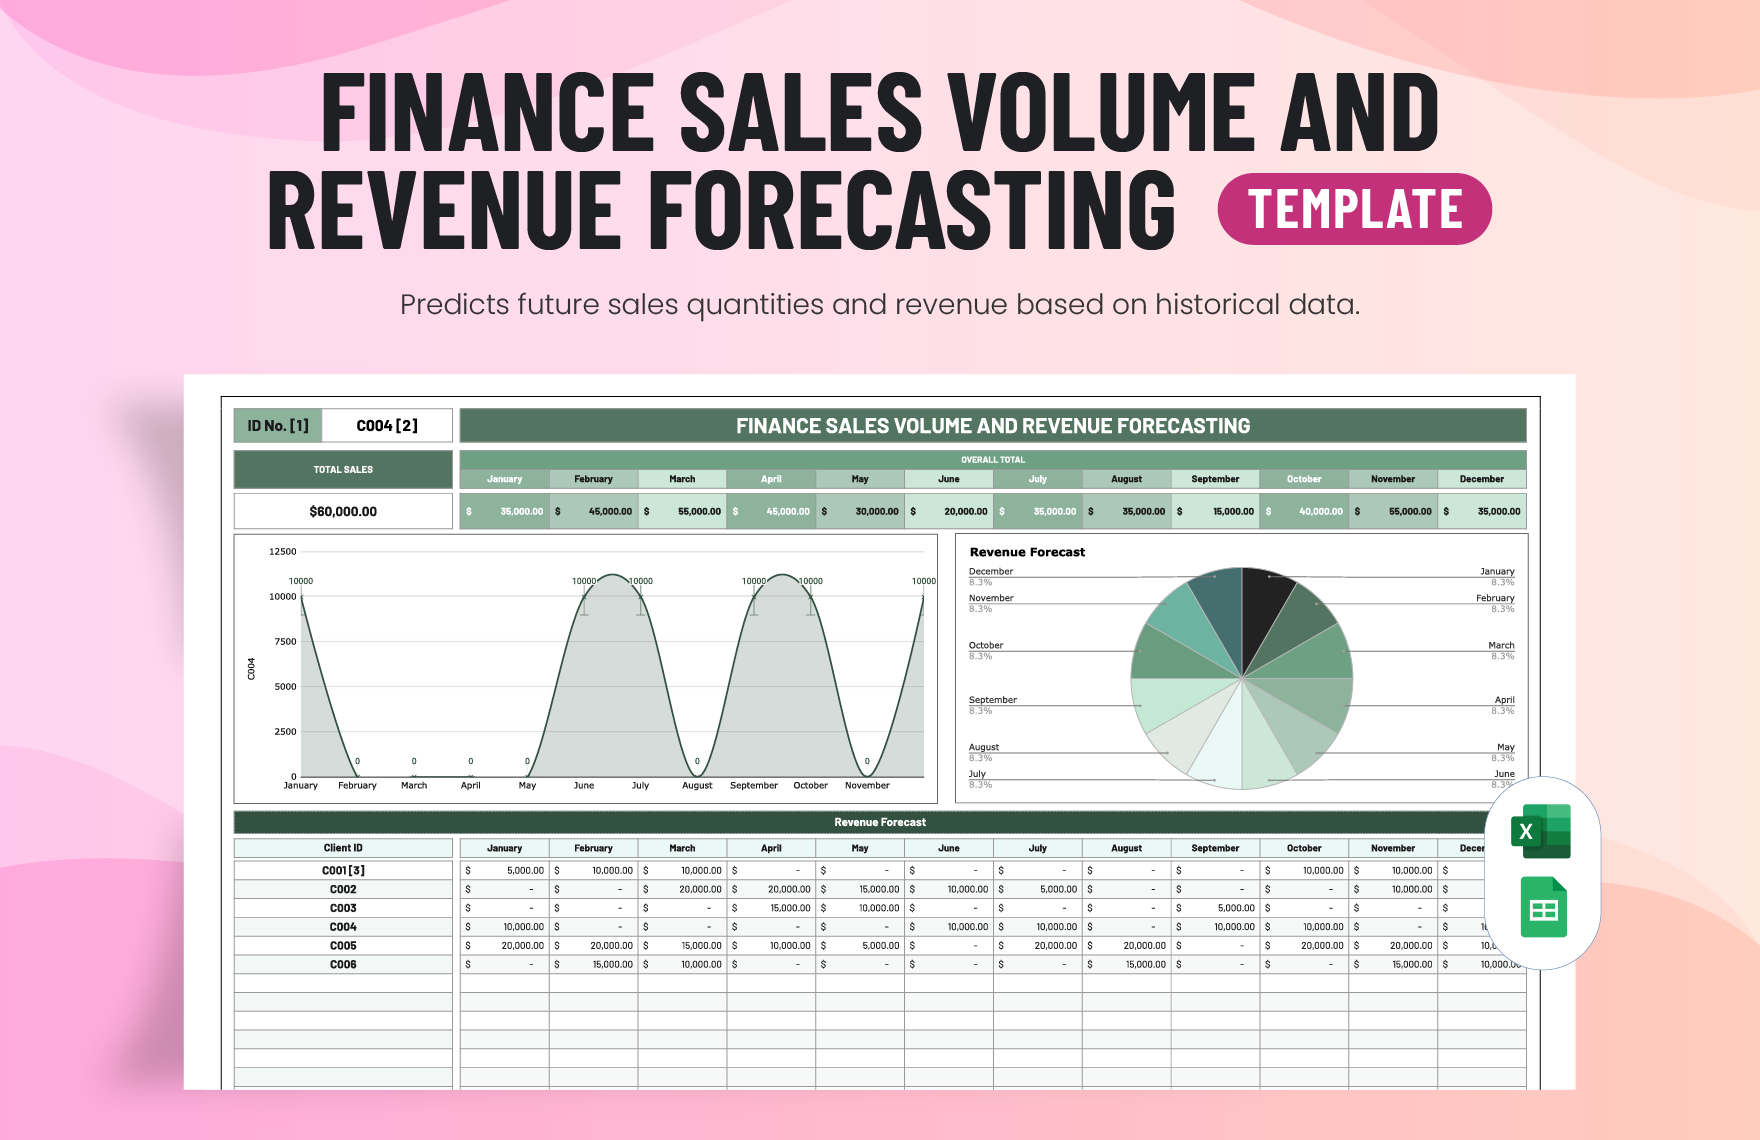 Finance Sales Volume and Revenue Forecasting Template in Excel, Google Sheets